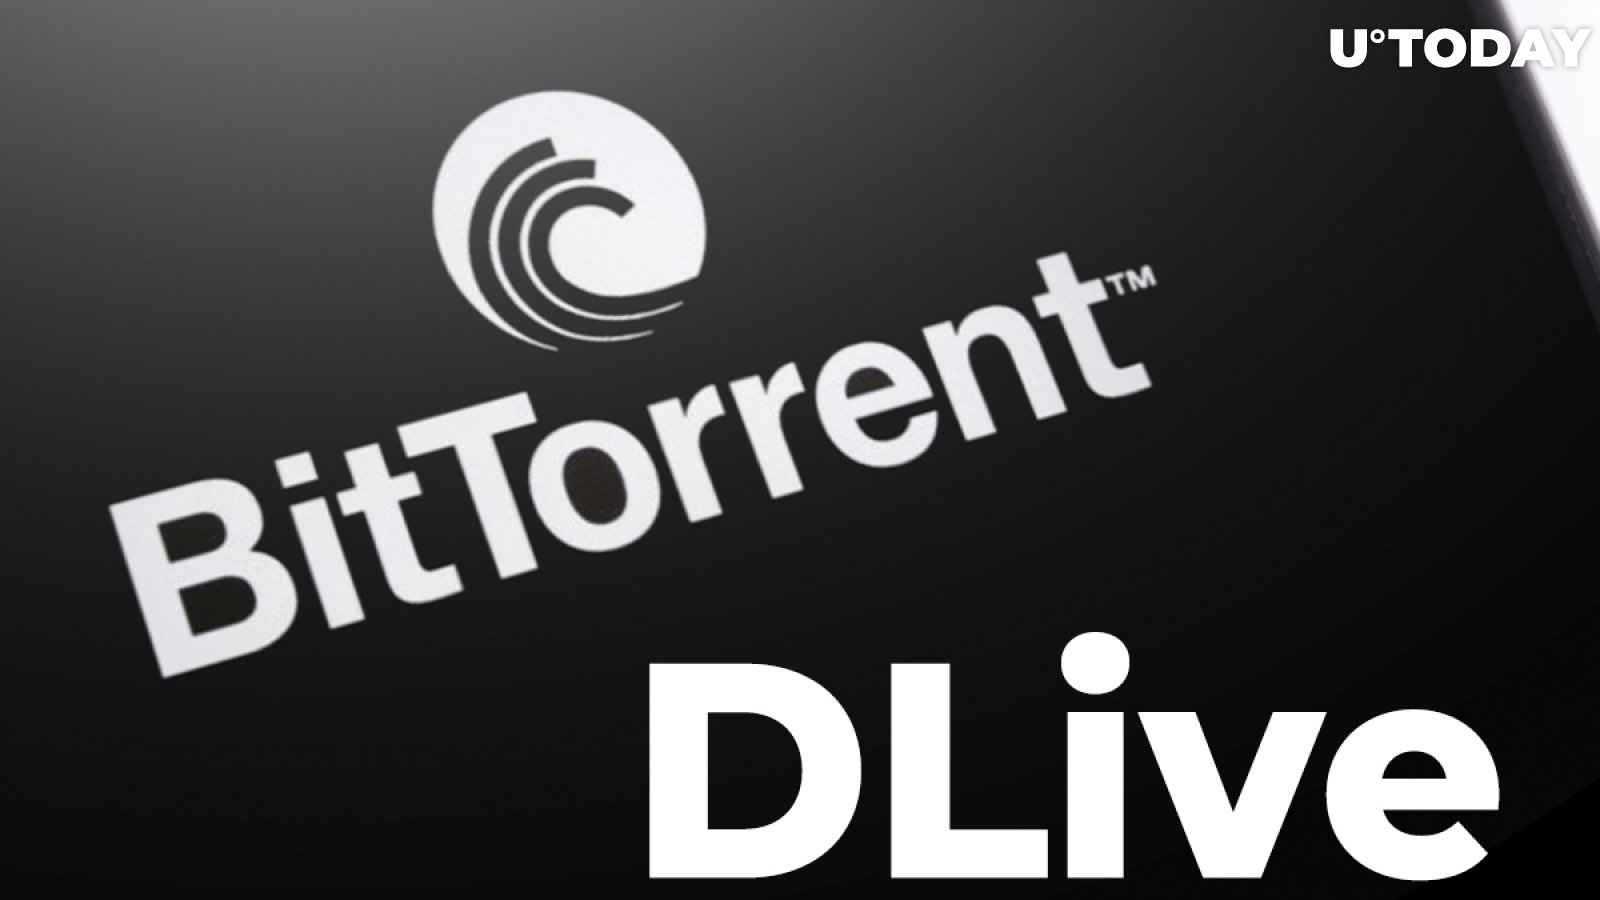 Tron Launches New Version of DLive Protocol, Teases New BitTorrent Website